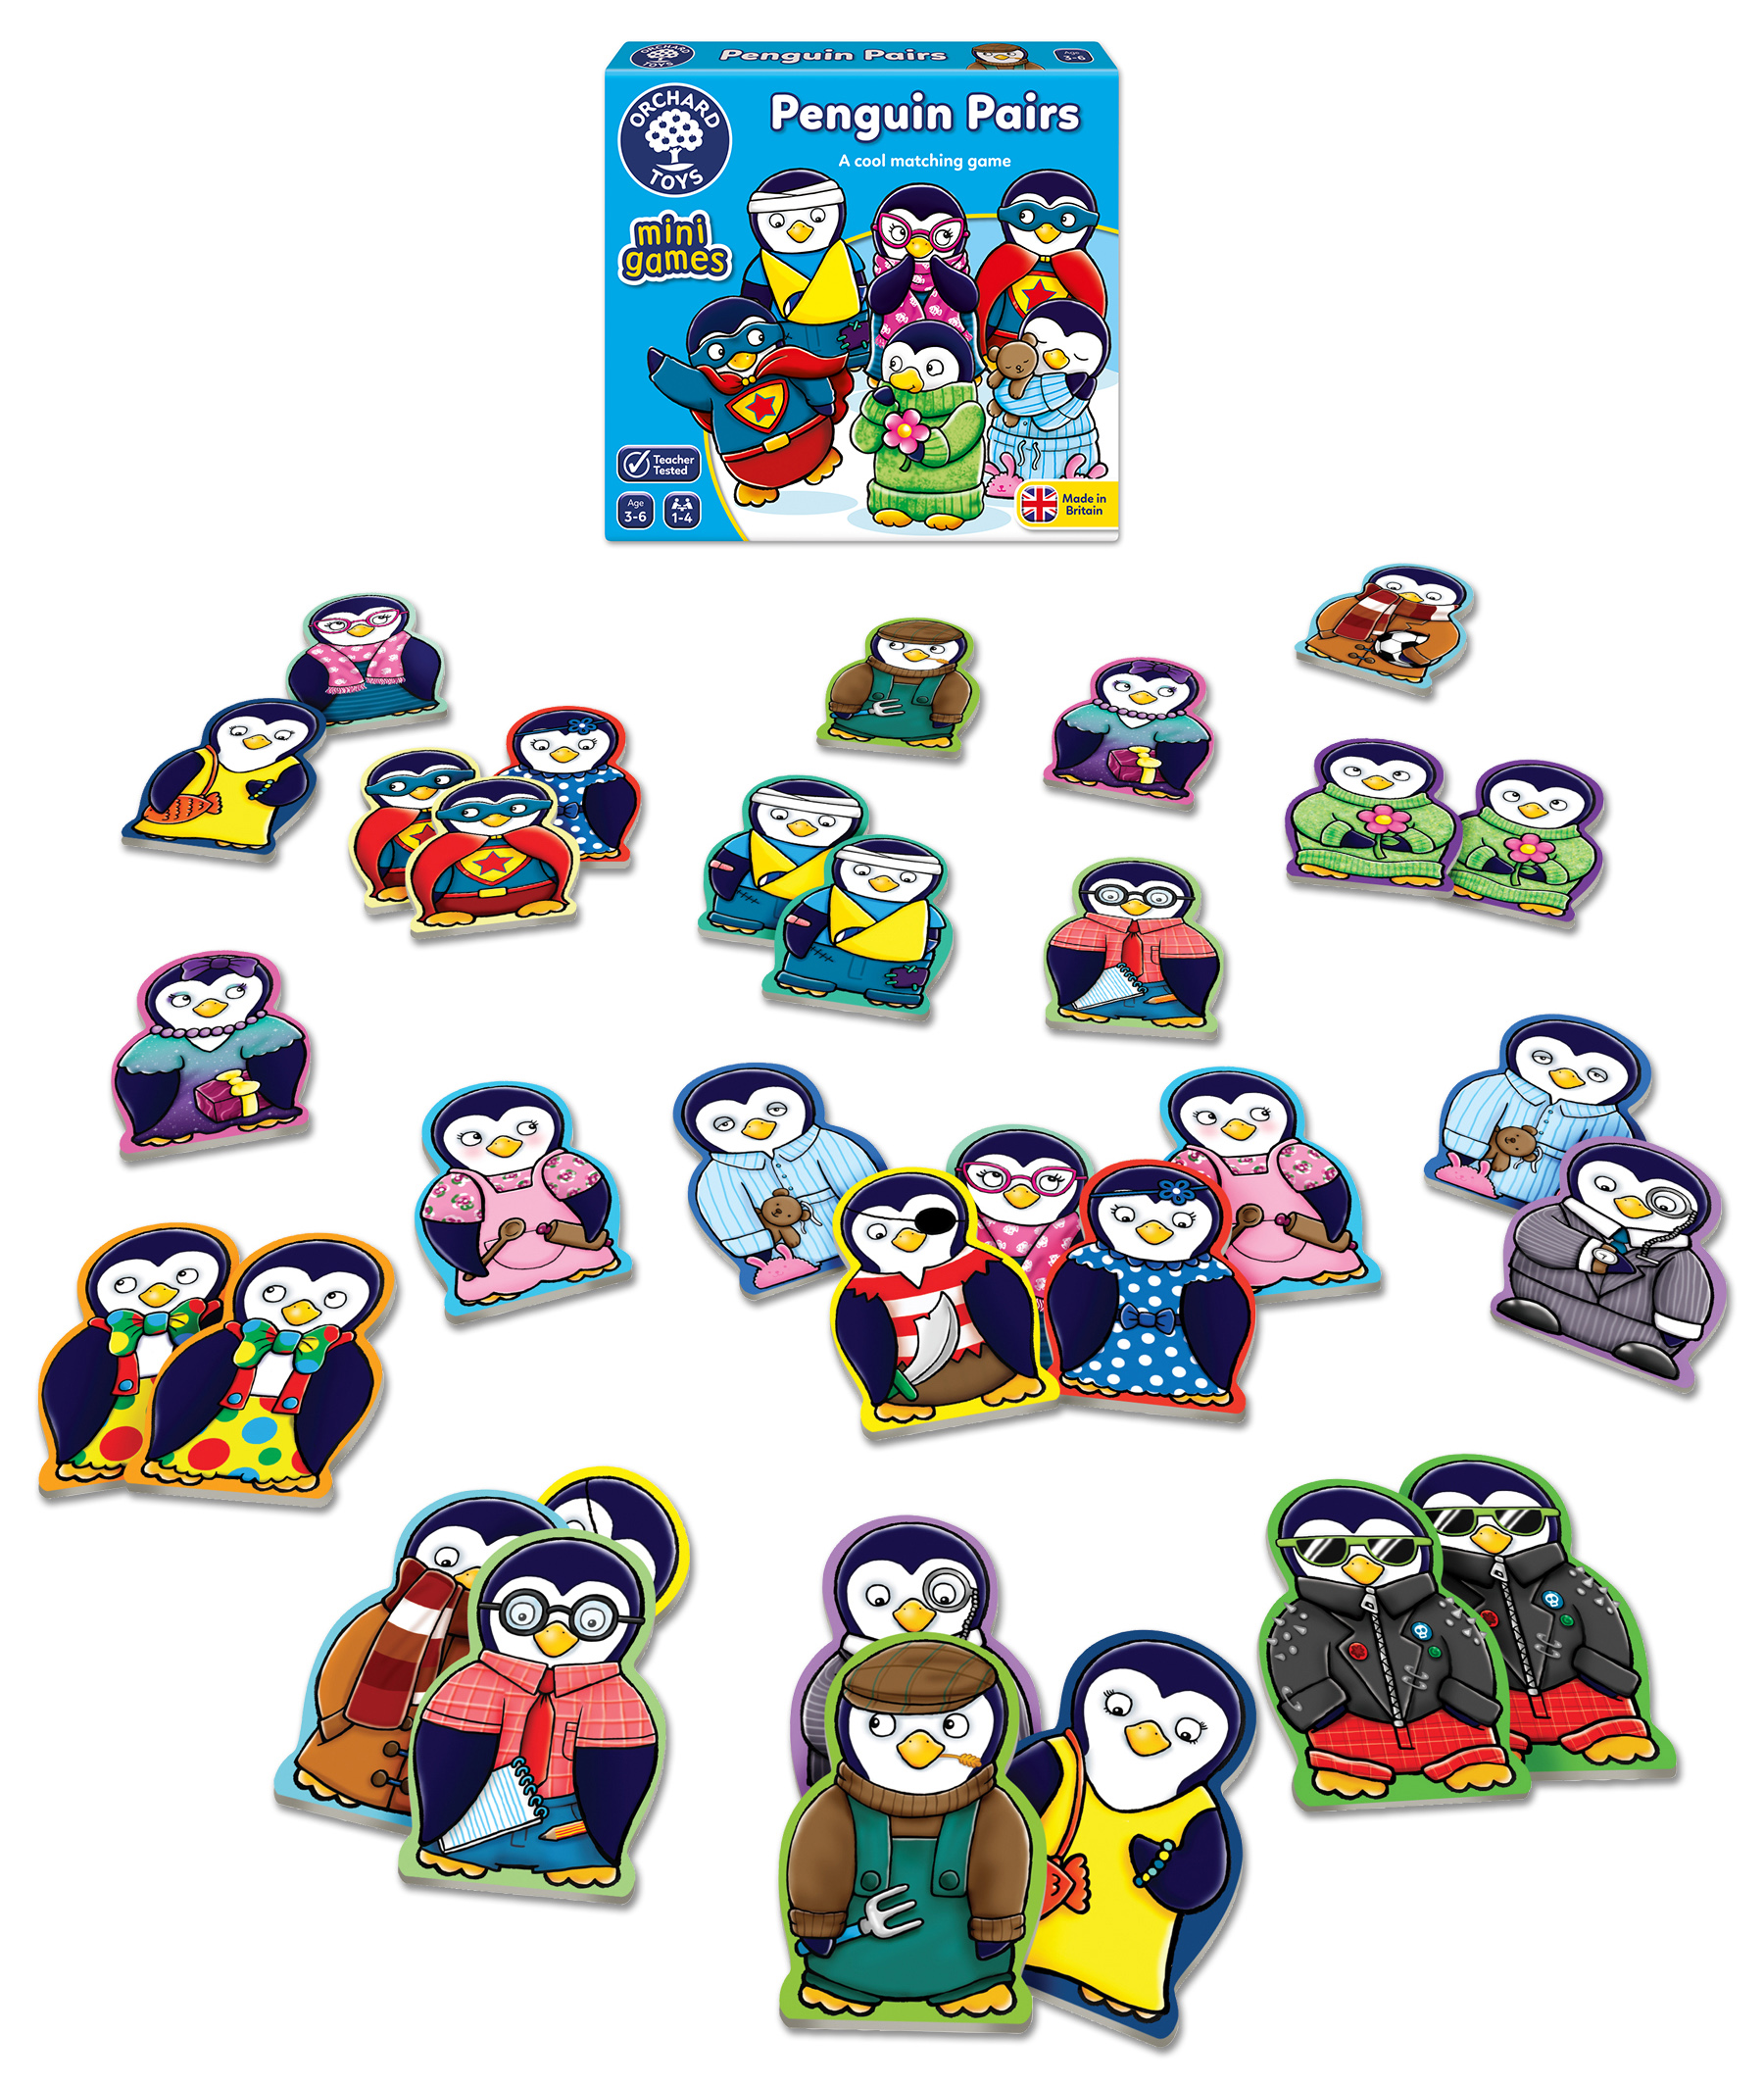 Orchard Toys MINI GAME PENGUIN PAIRS Educational Game Puzzle BN 